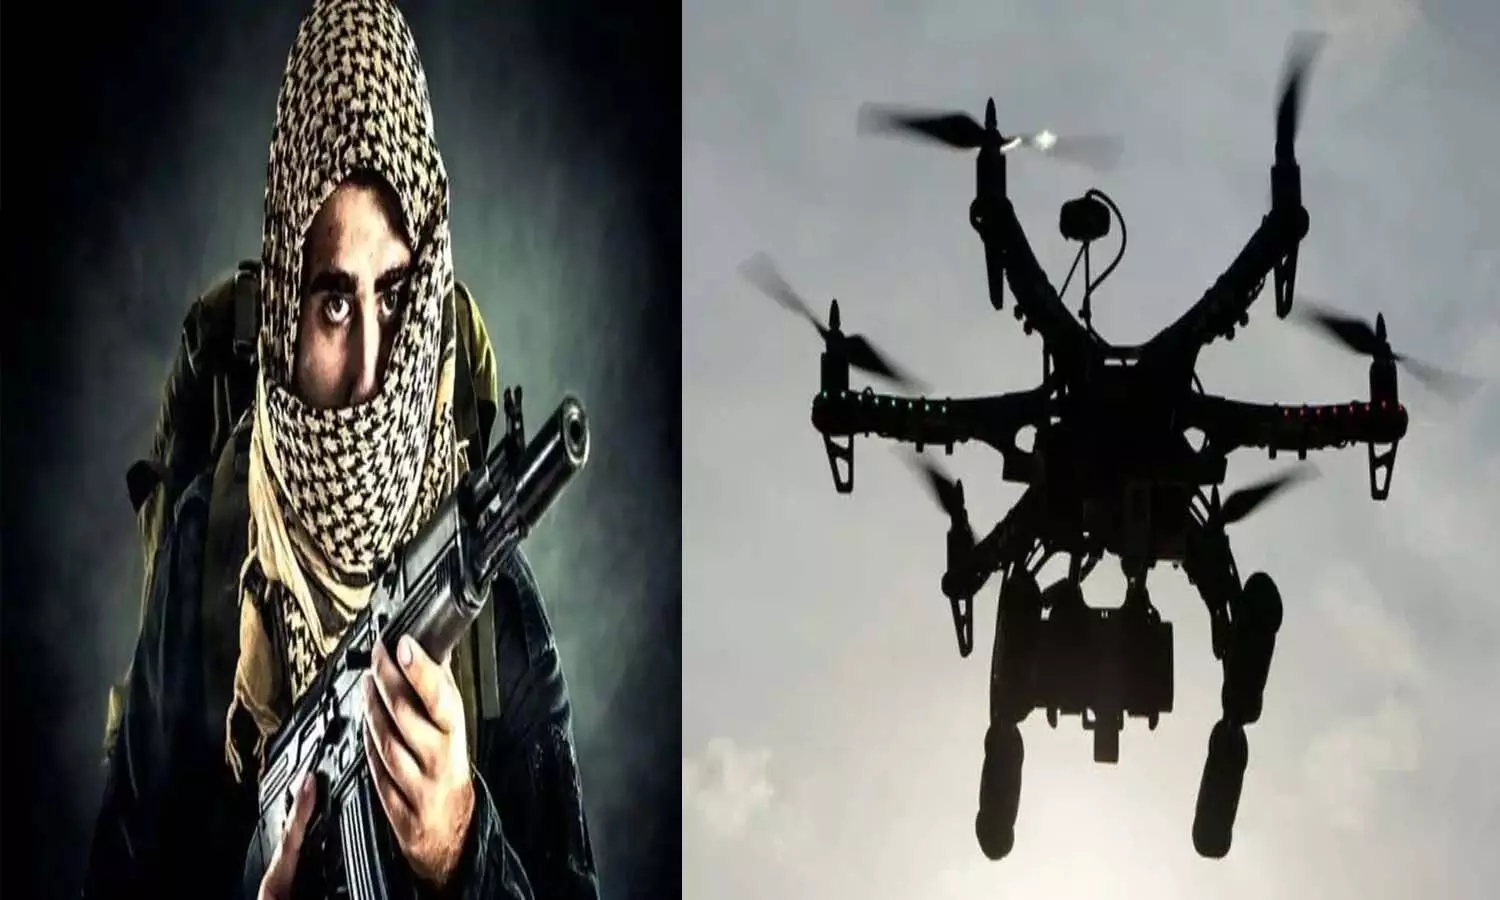 Drone is the most dangerous weapon in the hands of terrorists